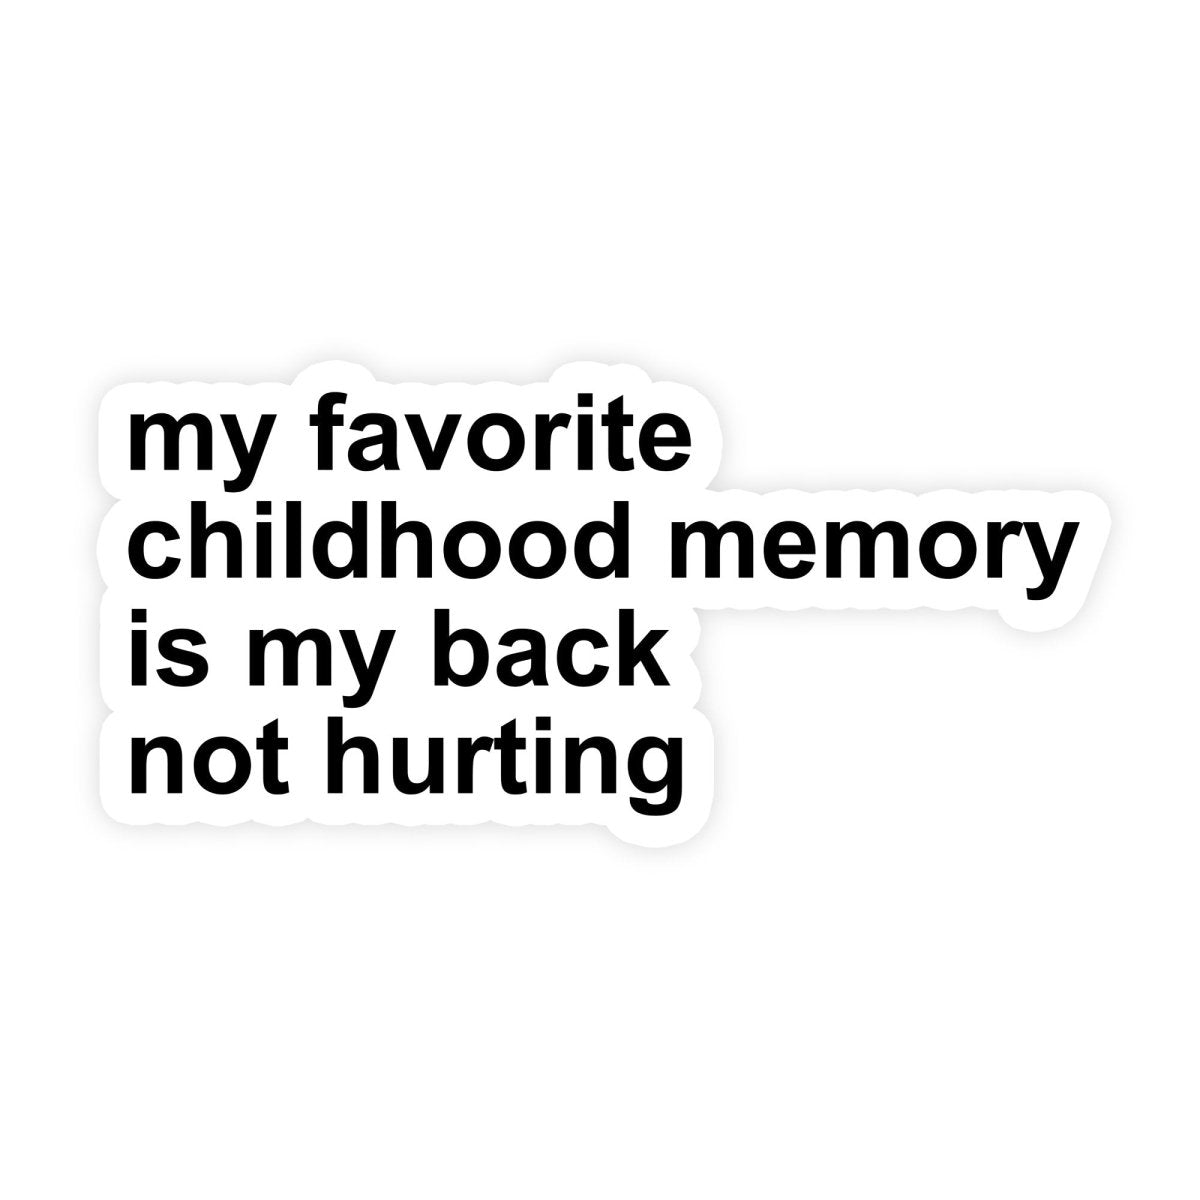 My Favorite Childhood Memory Is My Back Not Hurting Sticker - stickerbullMy Favorite Childhood Memory Is My Back Not Hurting StickerStickersstickerbullstickerbullTaylor_MemoryBackHurtMy Favorite Childhood Memory Is My Back Not Hurting Sticker